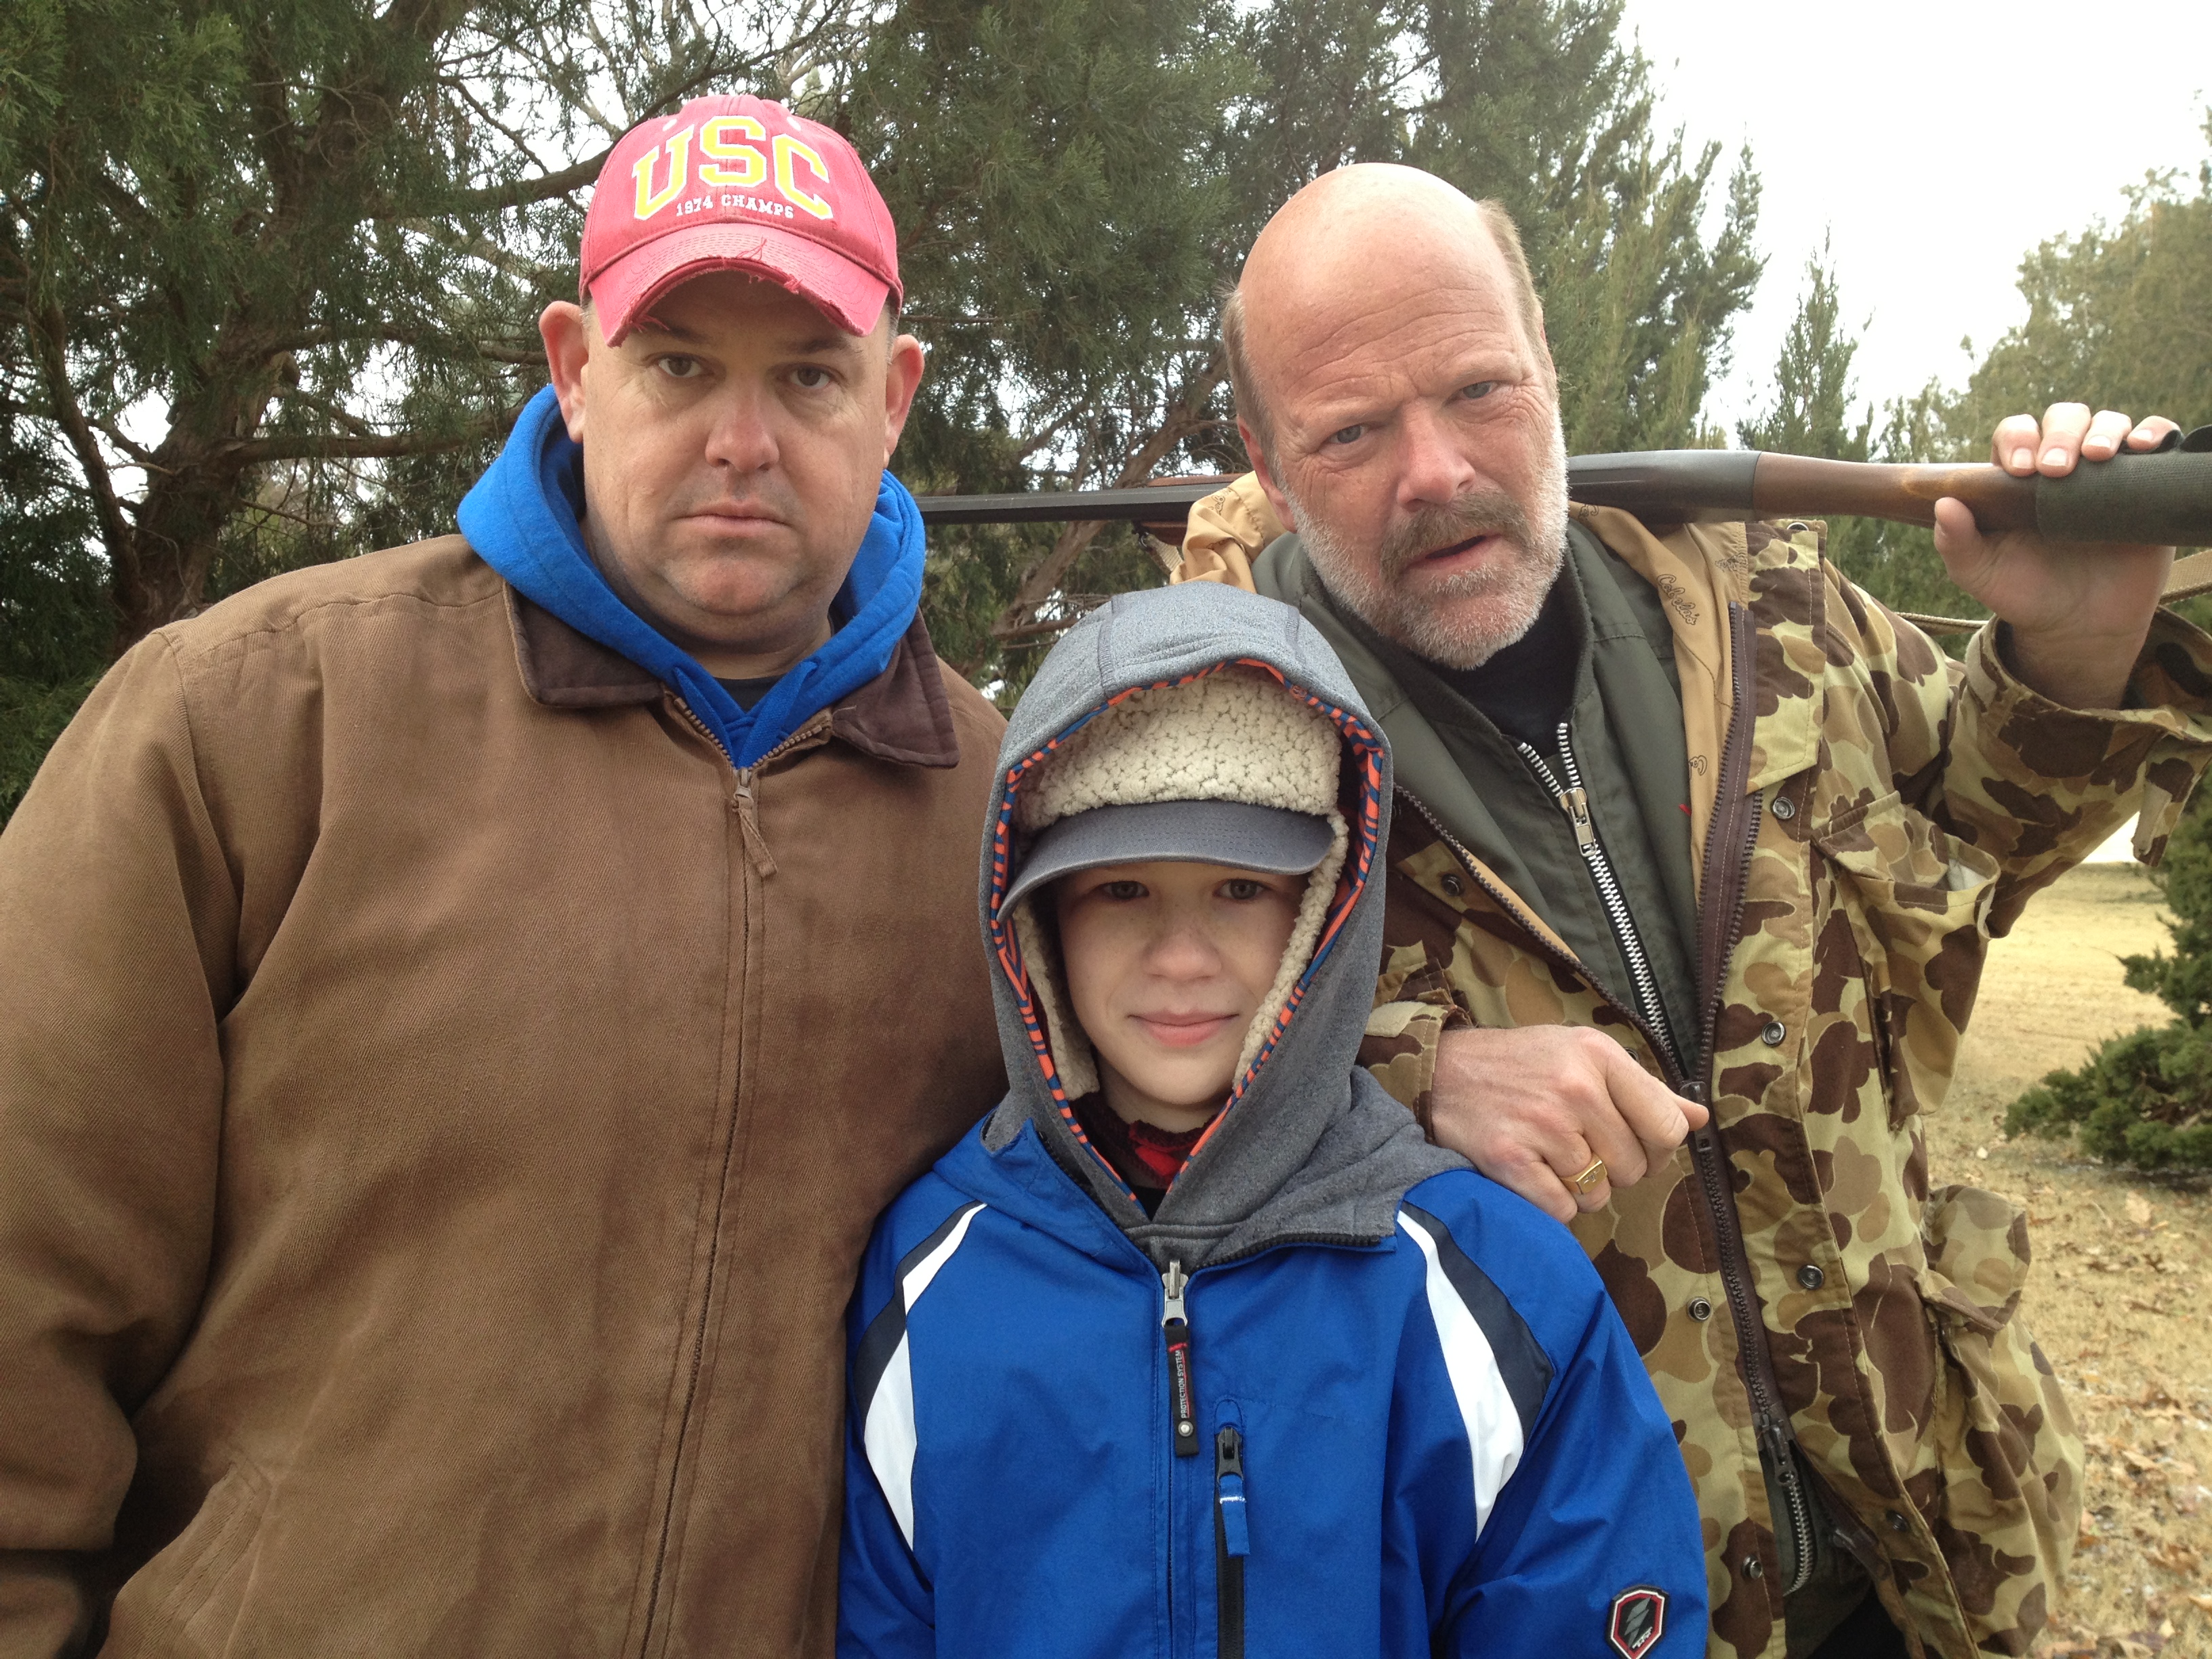 My son Dylan and I with Rex Linn prepping for an upcoming role.